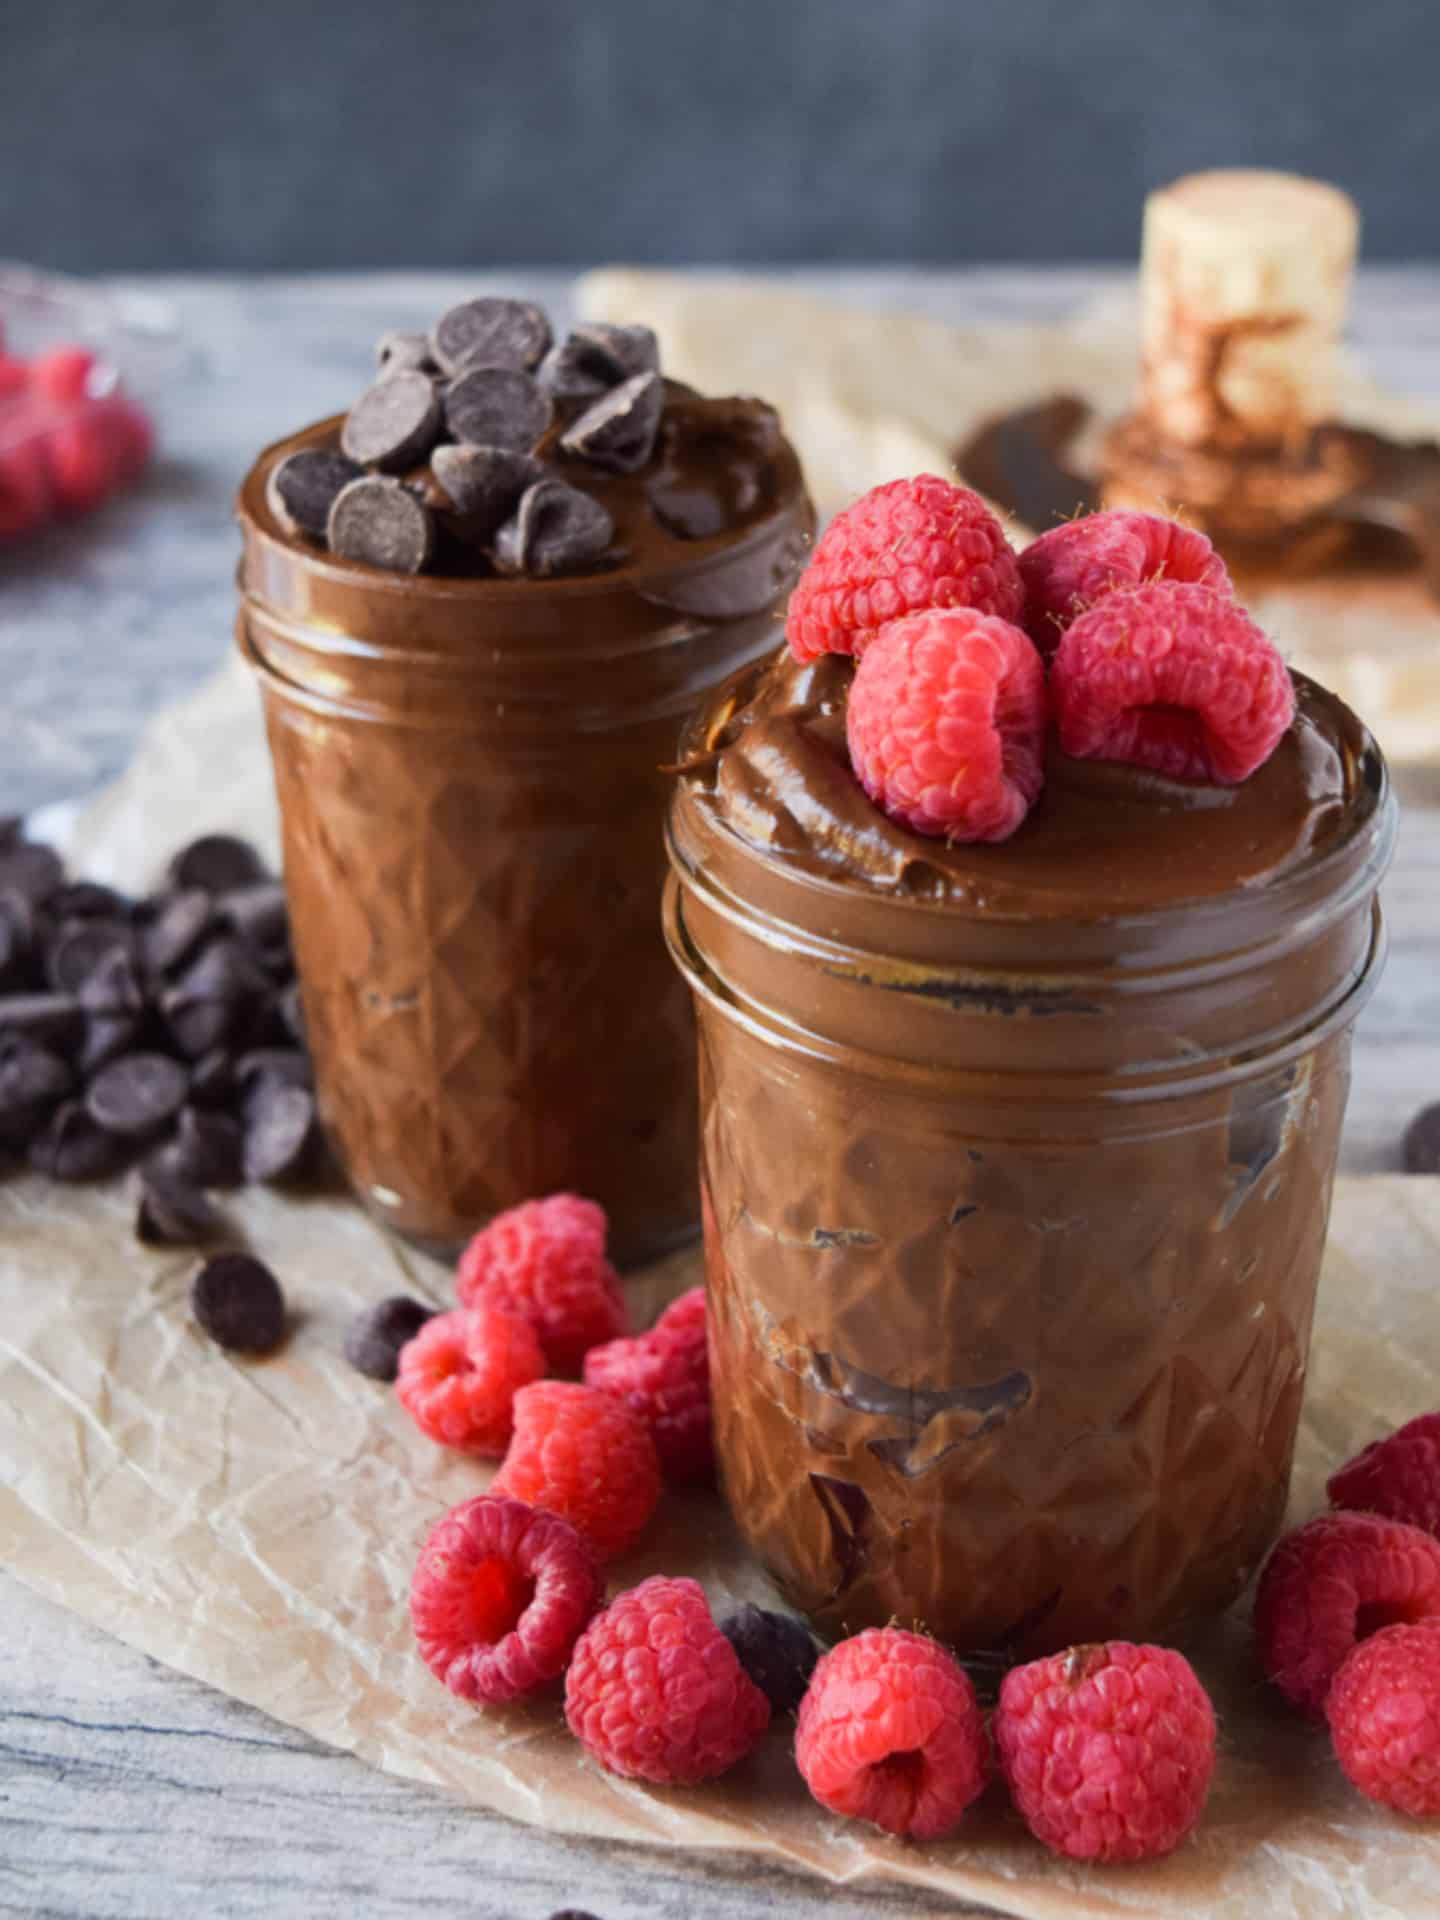 Avocado chocolate pudding with chocolate chips and raspberries.